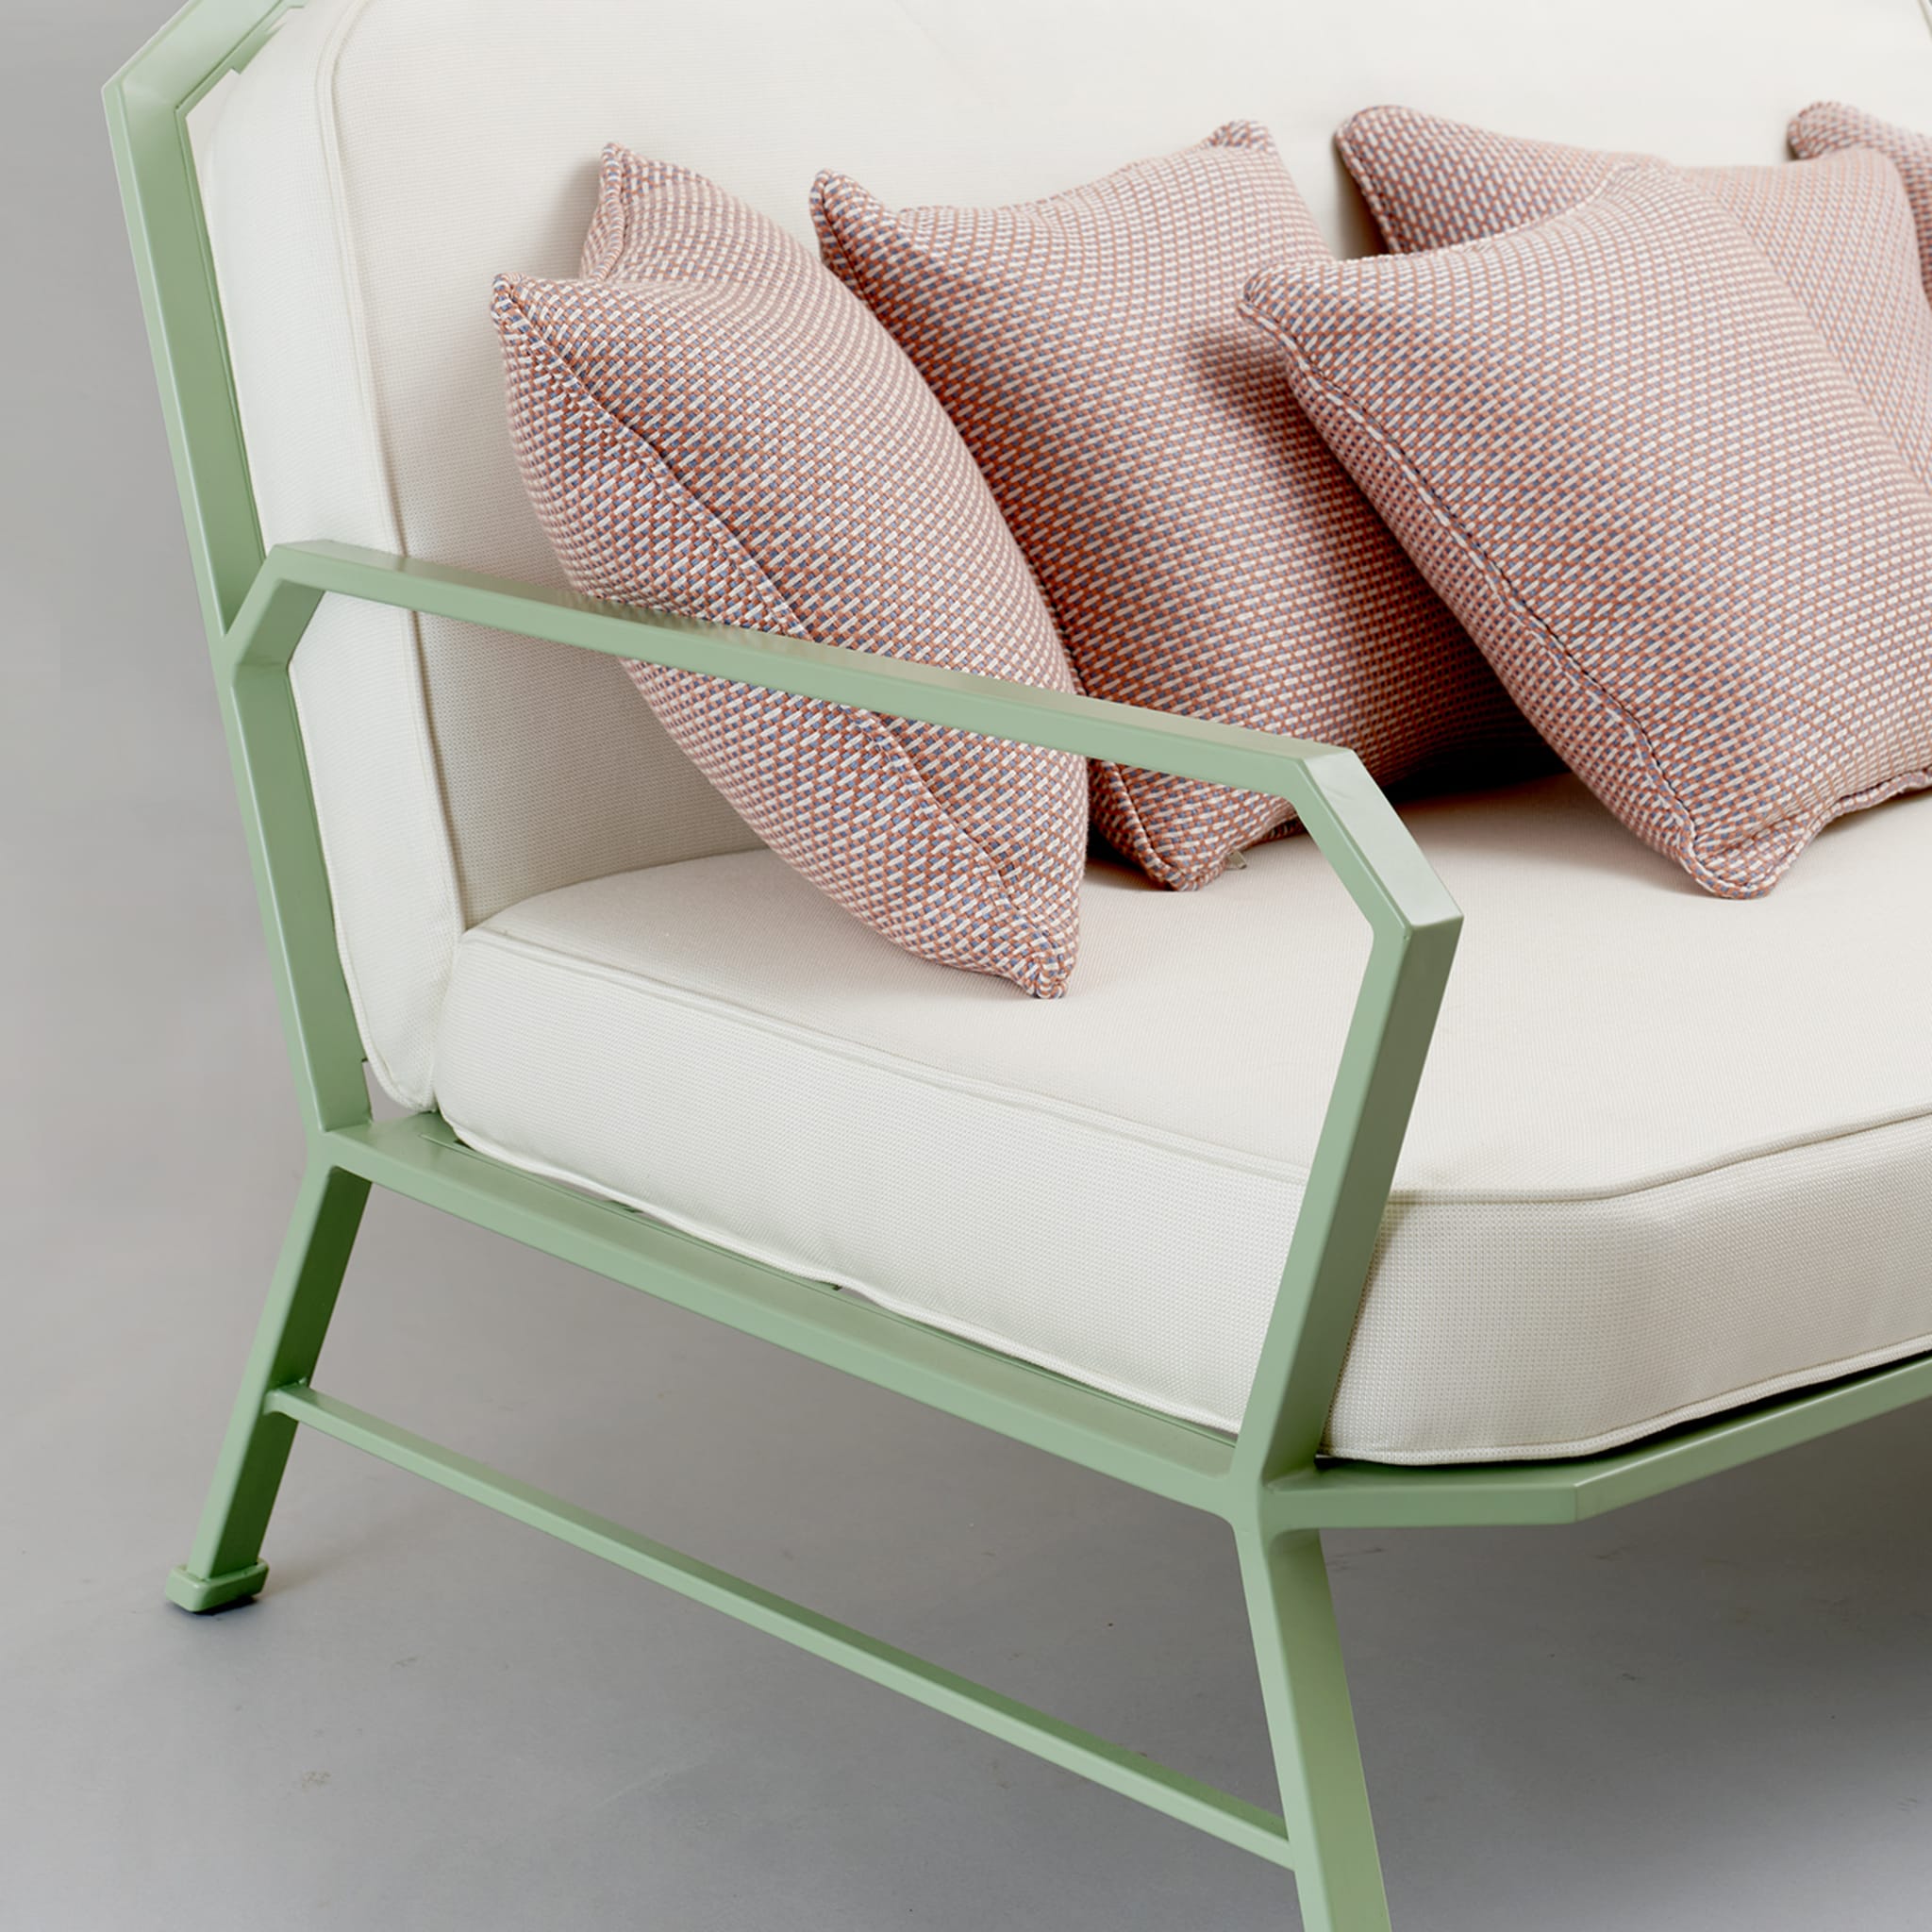 Forest Green & White Sofa by Officina Ciani - Alternative view 1